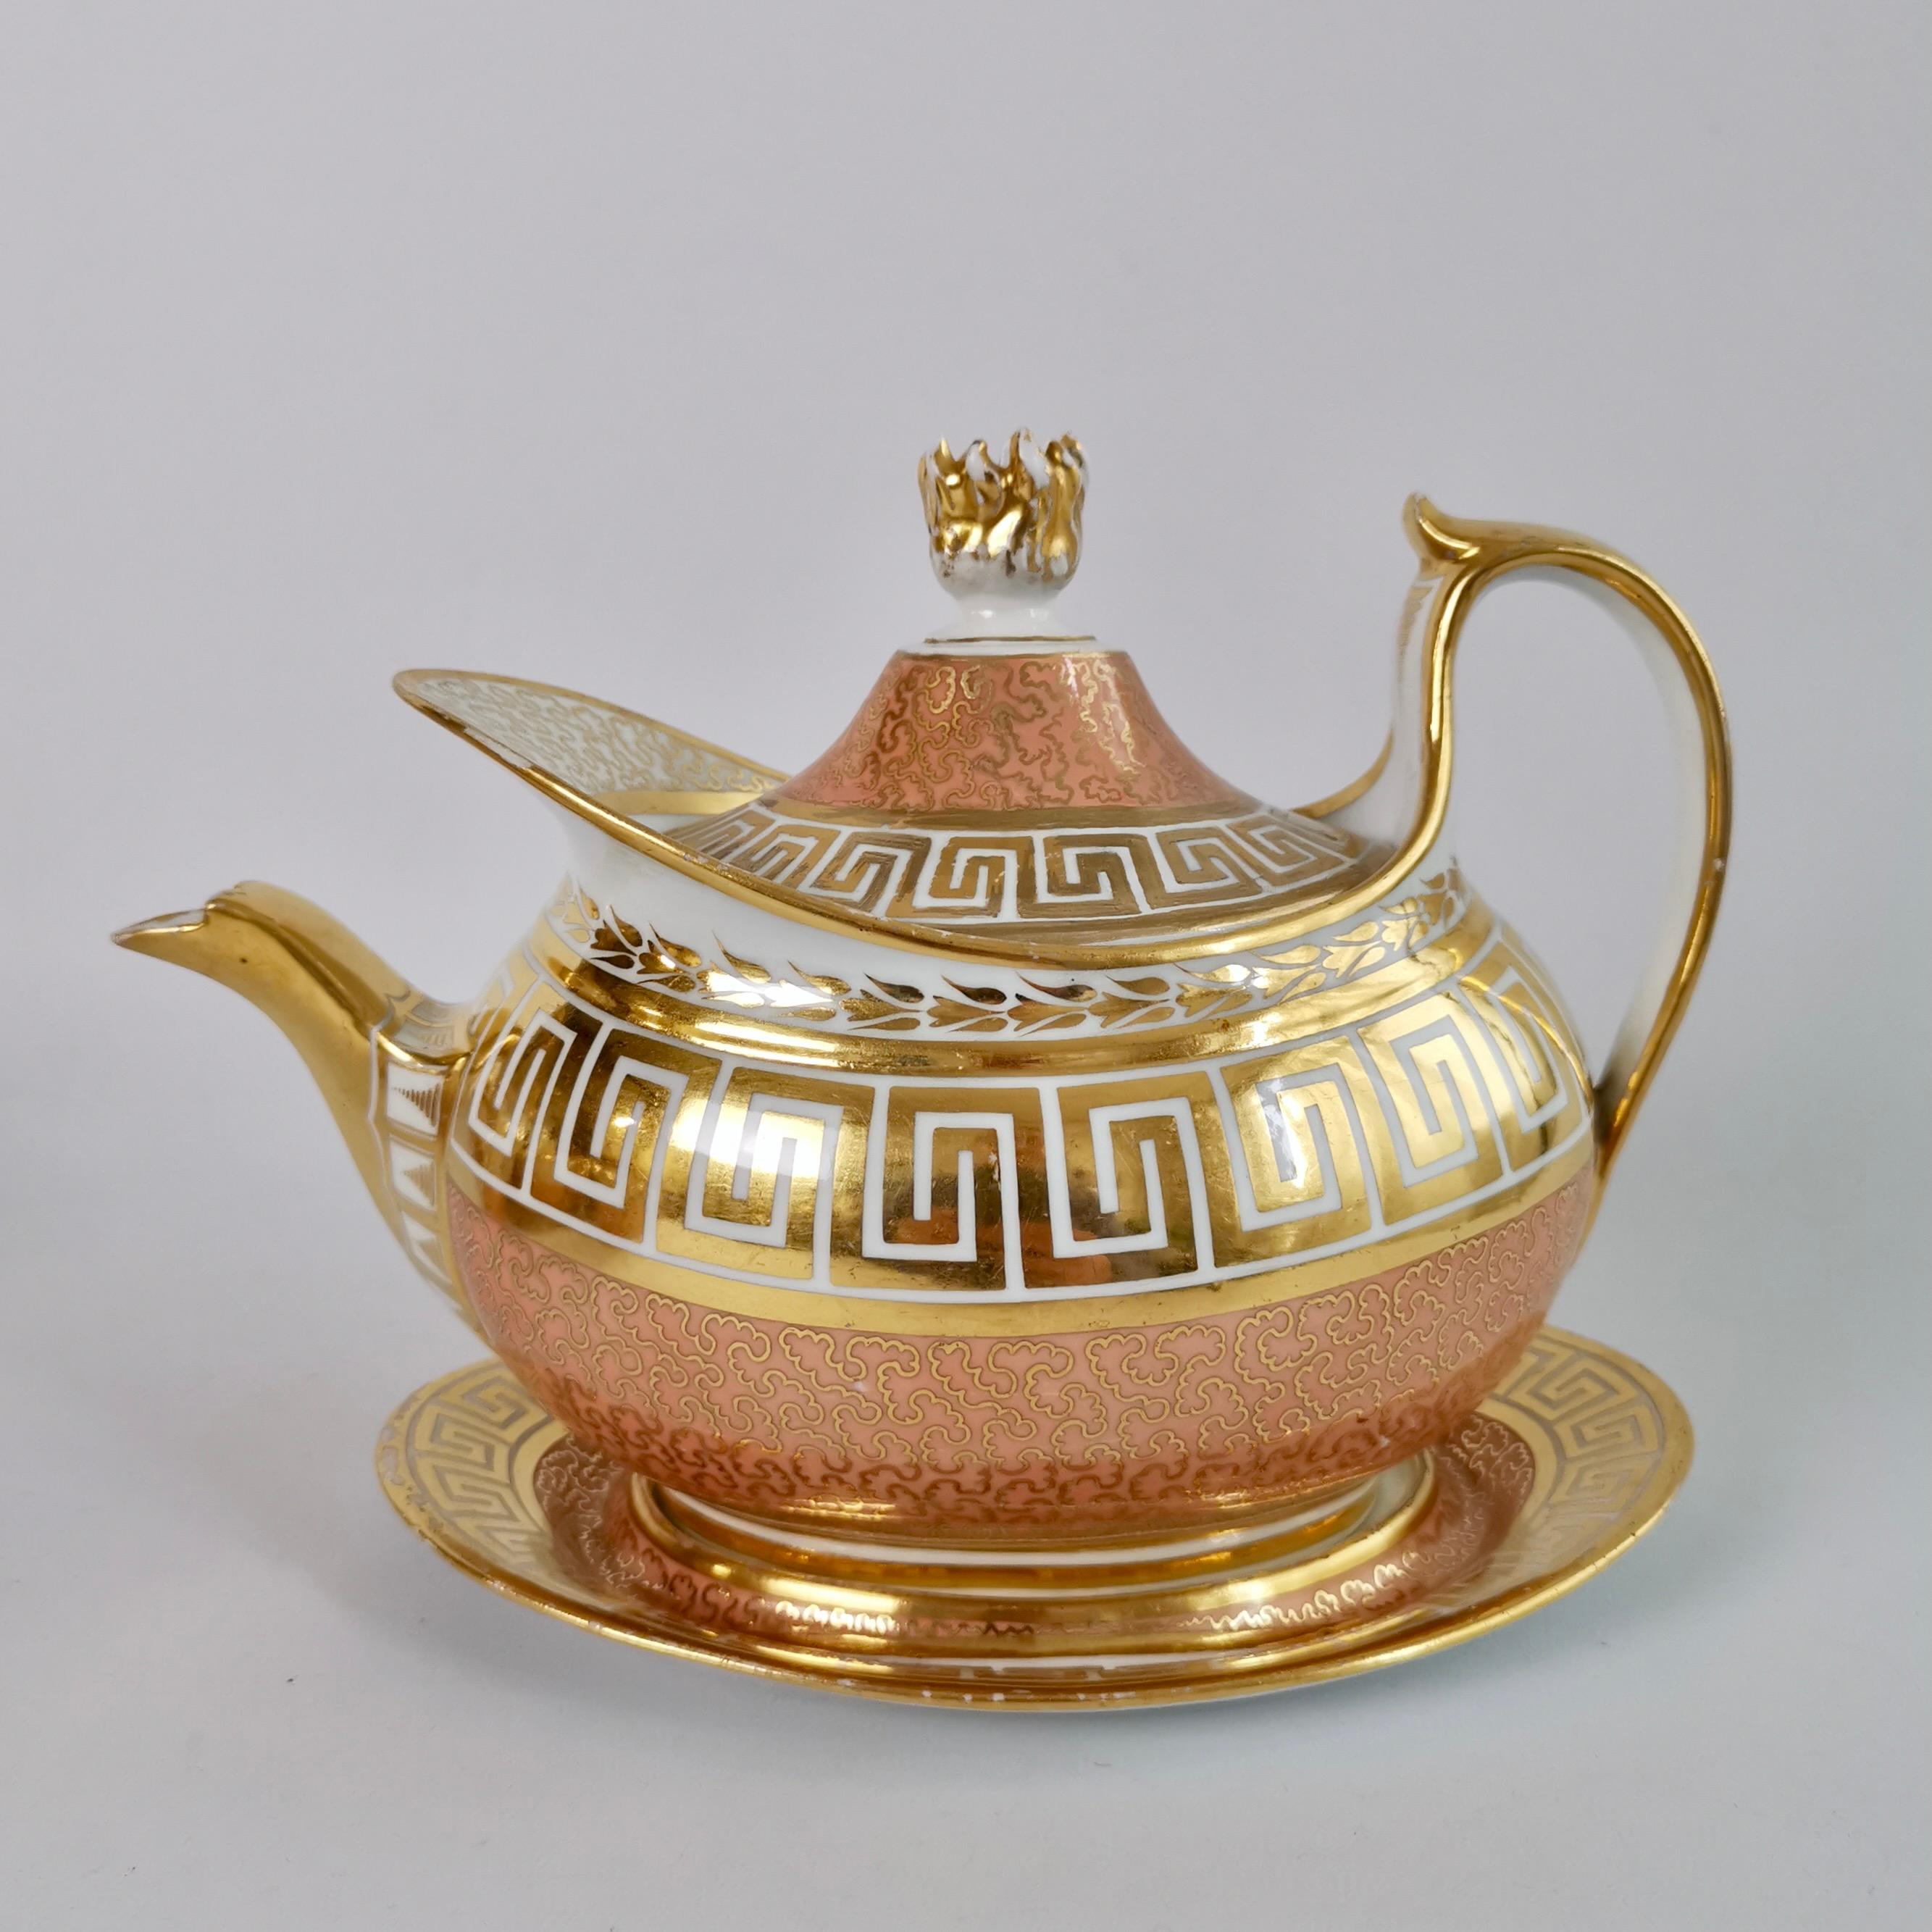 This is a spectacular tea service made by Barr, Flight & Barr around the year 1804. The service has the characteristic deep peach with gilt vermicelli ground, and bands of lavishly gilded Greek keys in the neo-classical style. The service consists